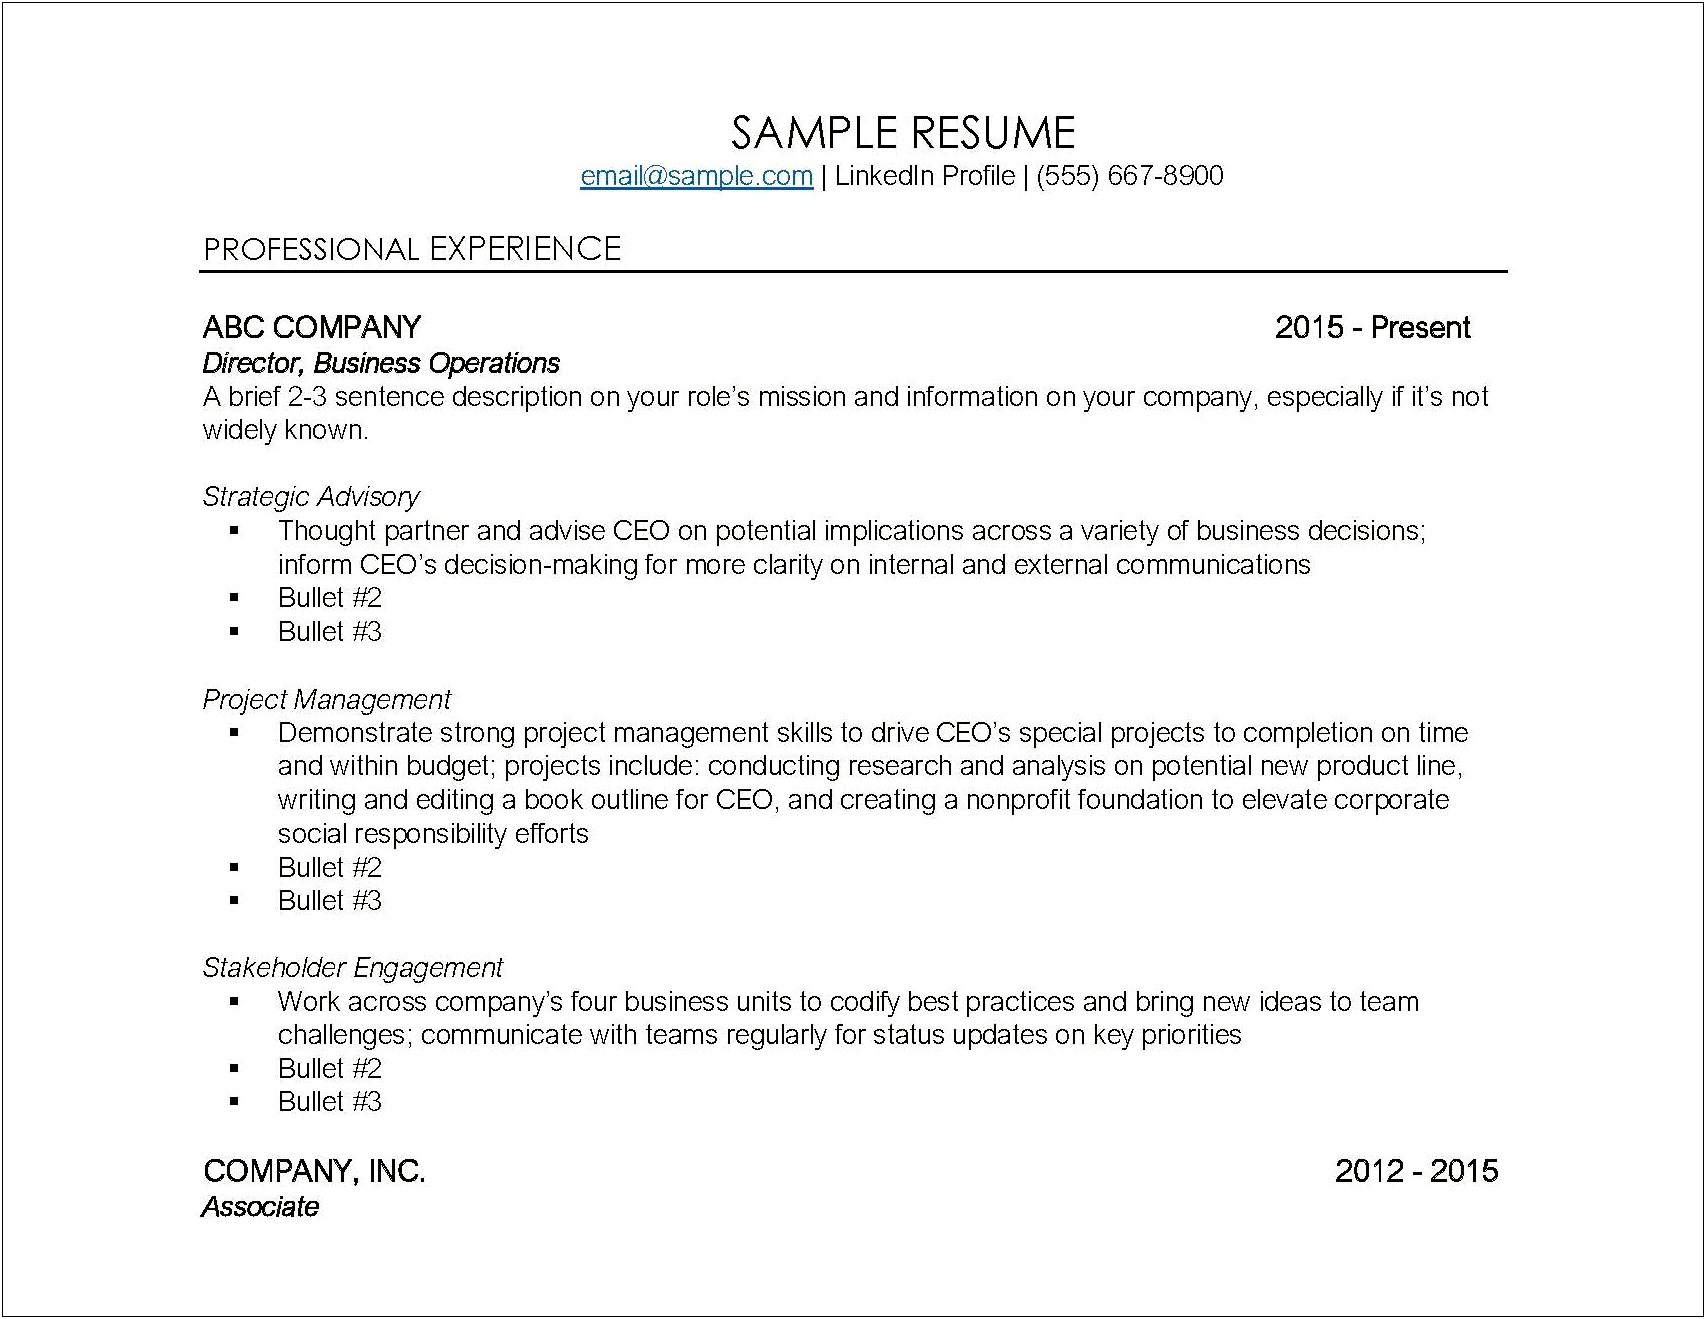 Can You Not Add Descriptions In Resume